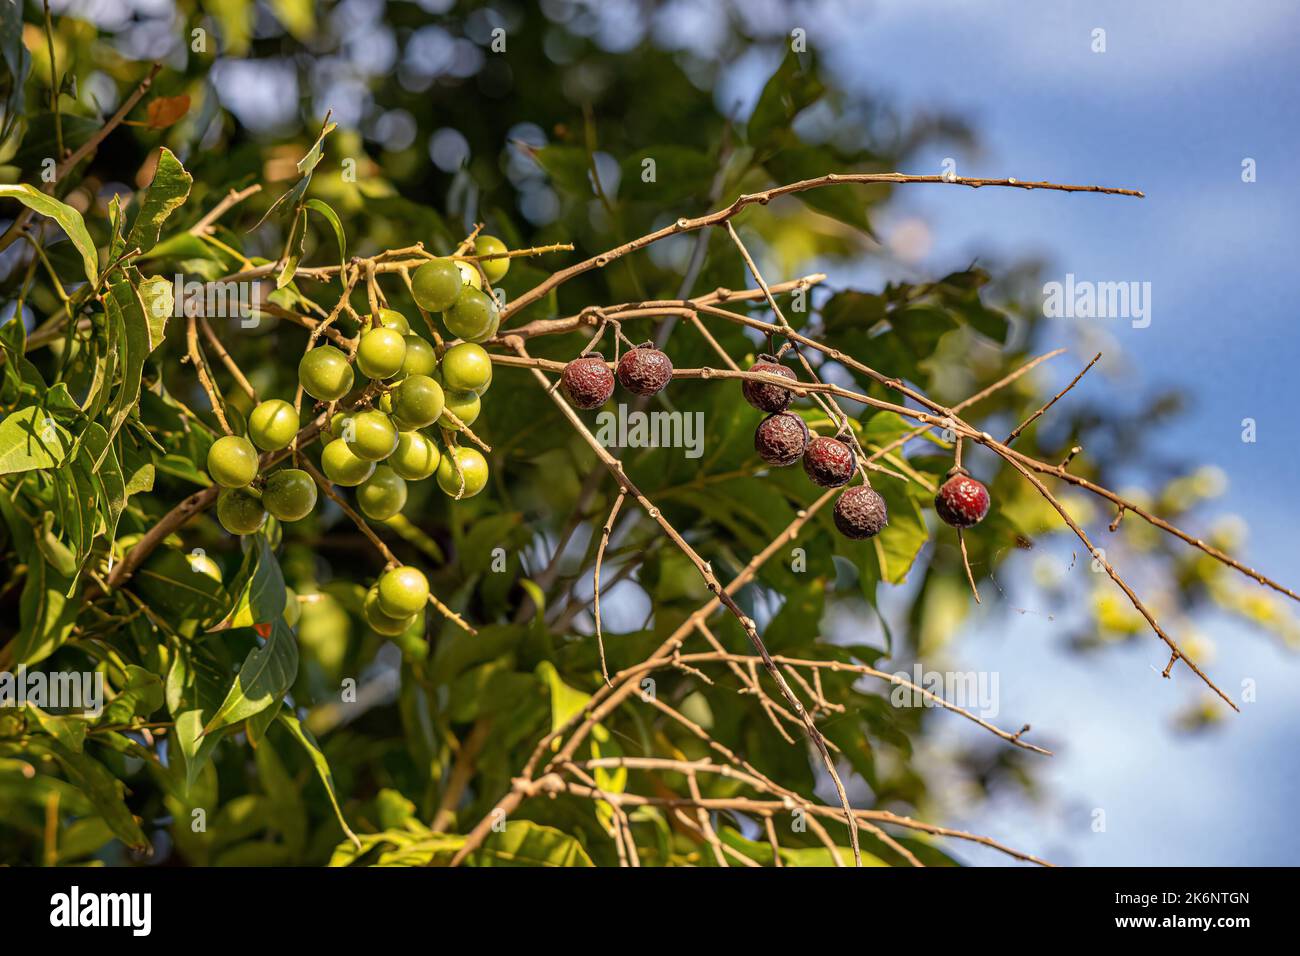 Wingleaf Soapberry Fruits of the species Sapindus saponaria with selective focus Stock Photo